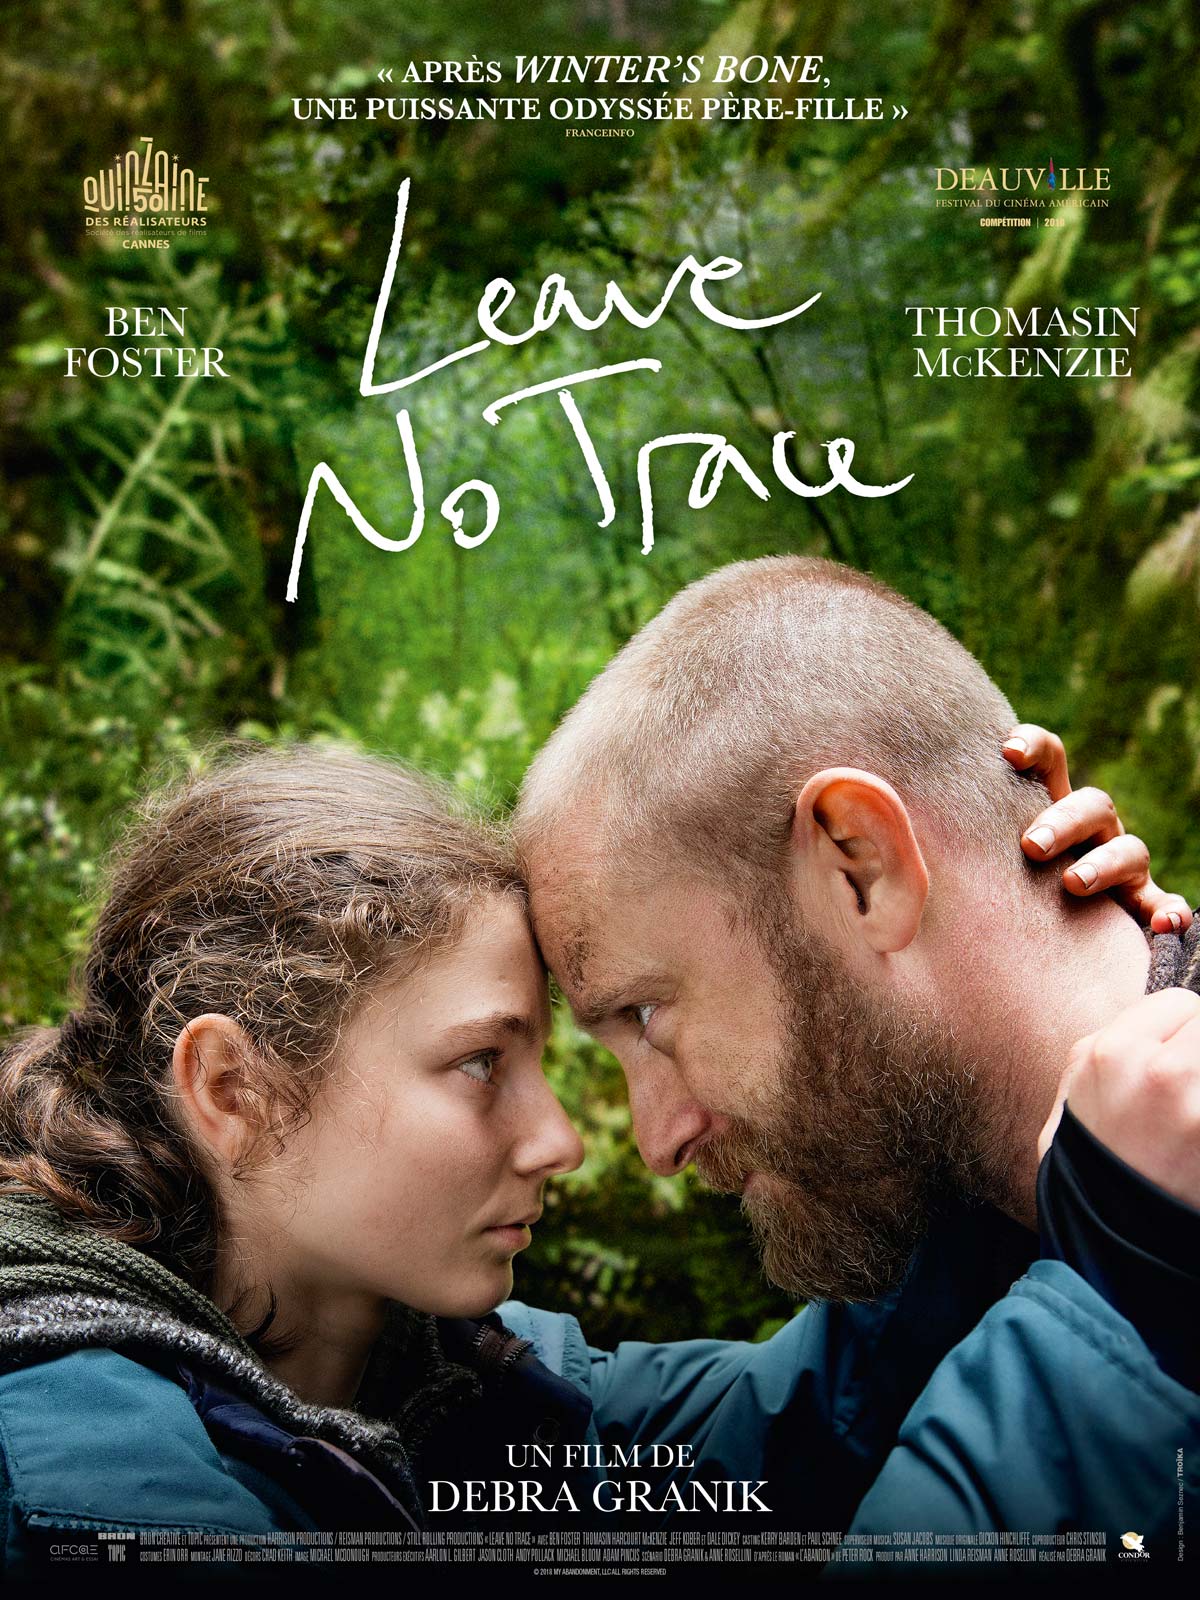 rate movie leave no trace